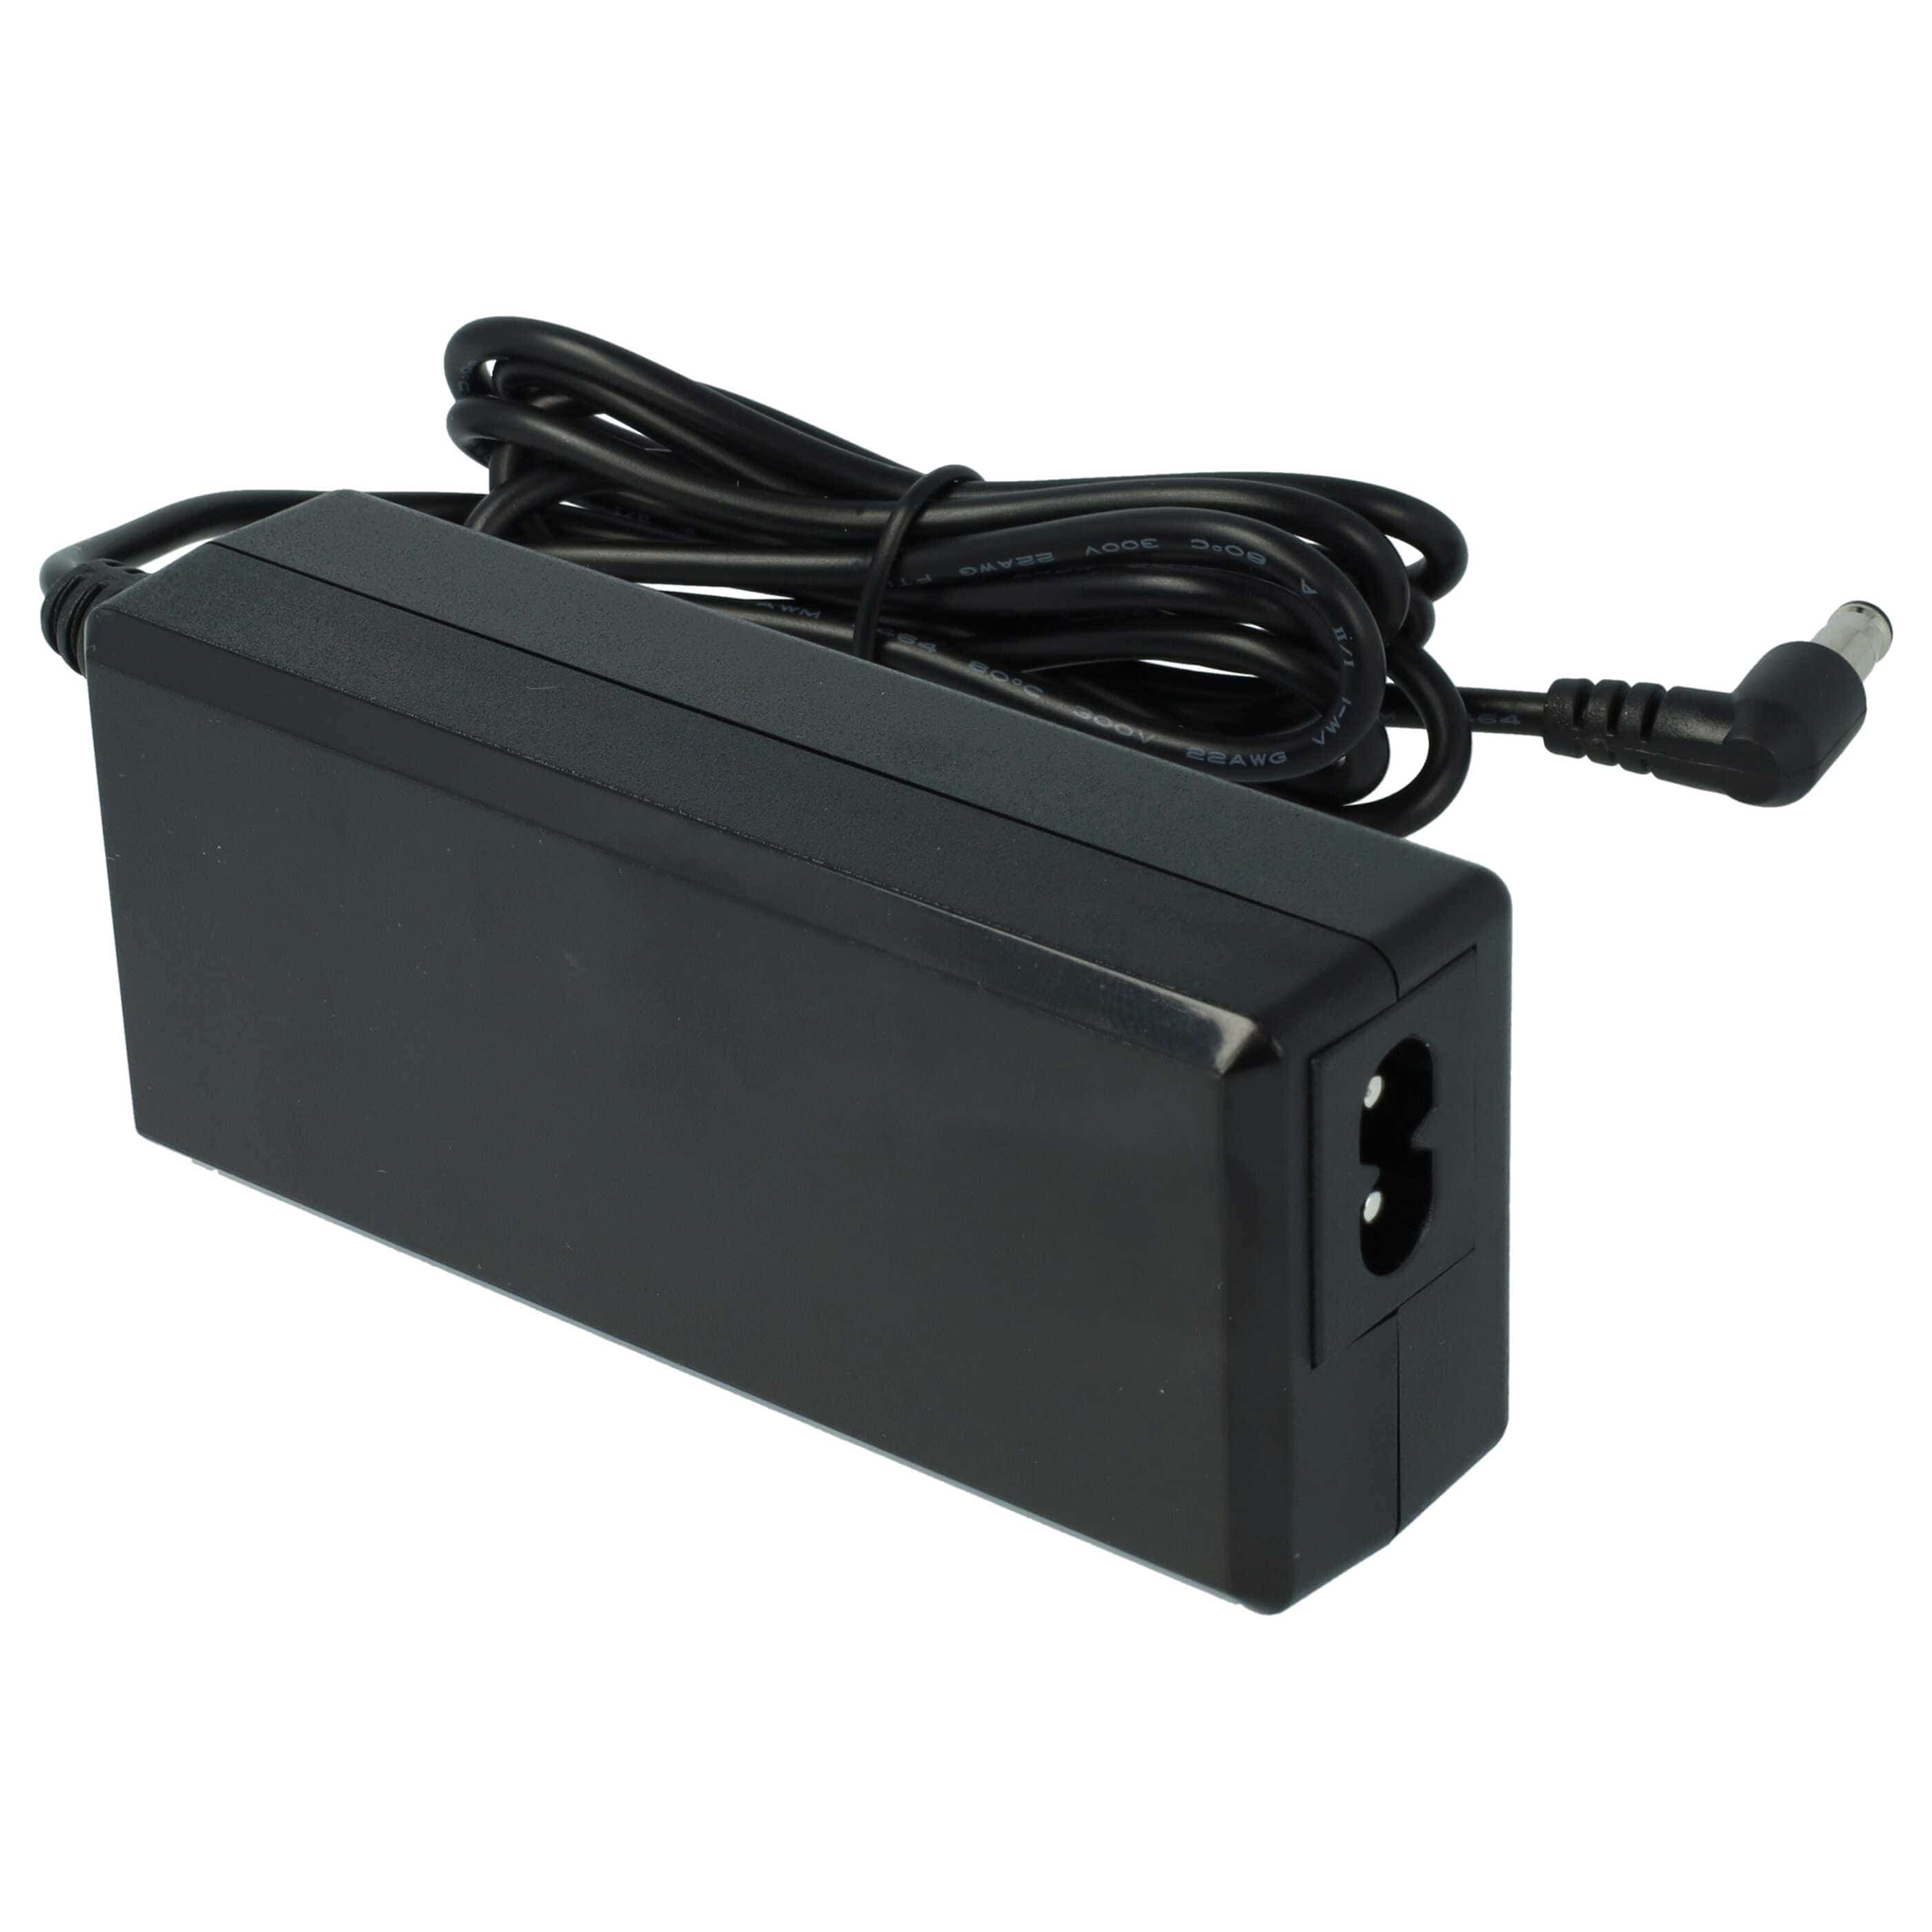 Mains Power Adapter replaces Epson 2116217-00, A391AR, A391AS, A391BS, A391GB for Epson Scanner - 230 cm